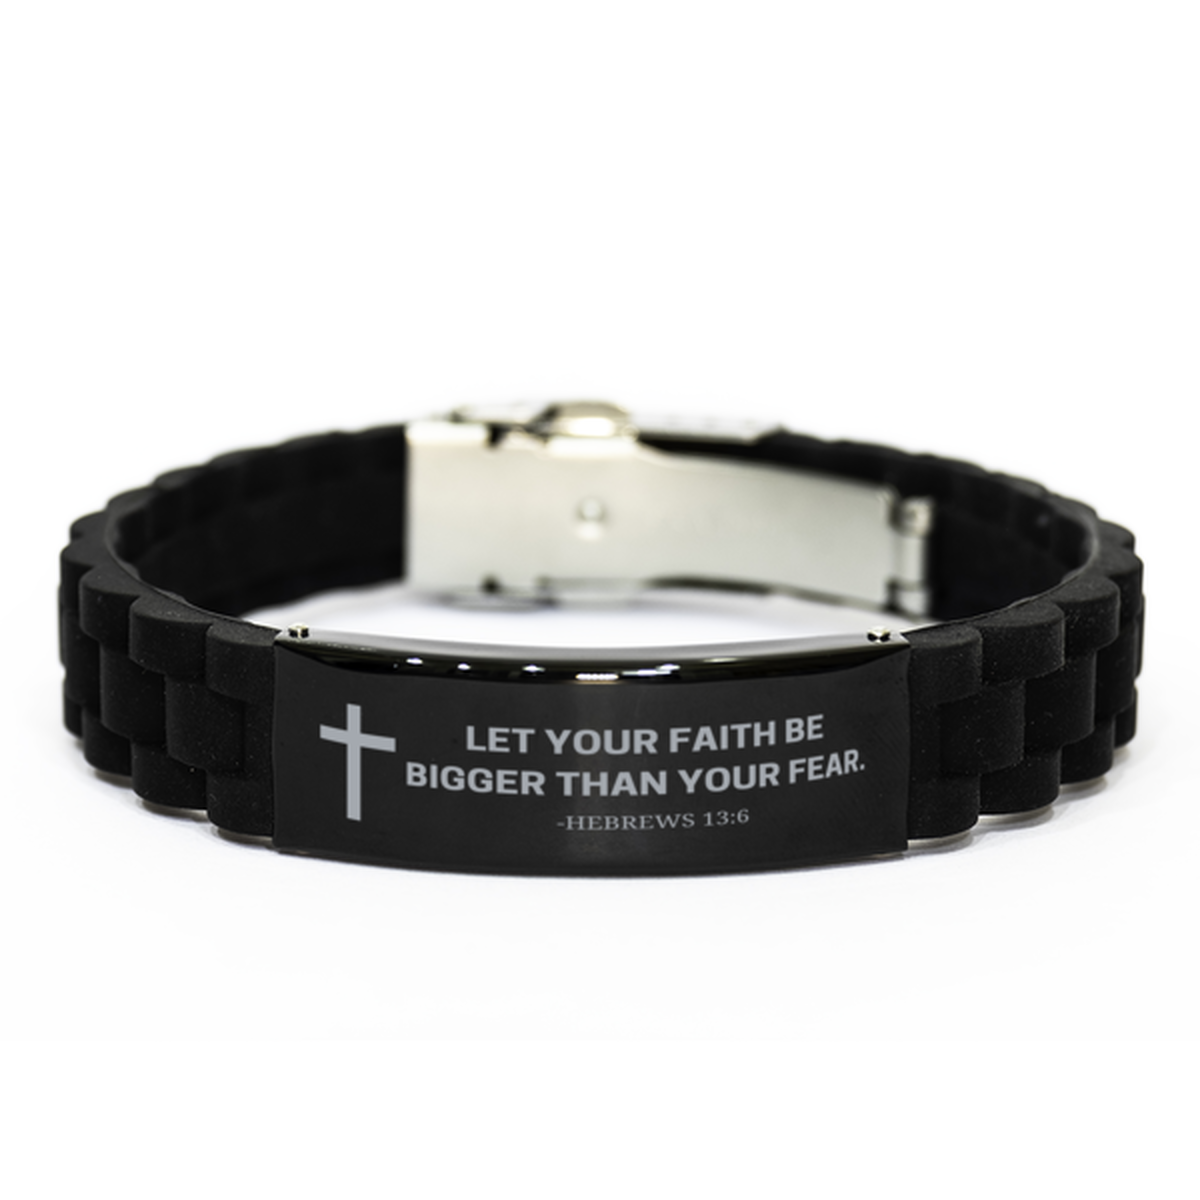 Baptism Gifts For Teenage Boys Girls, Christian Bible Verse Black Glidelock Clasp Bracelet, Let your faith be bigger than your fear, Catholic Confirmation Gifts for Son, Godson, Grandson, Nephew